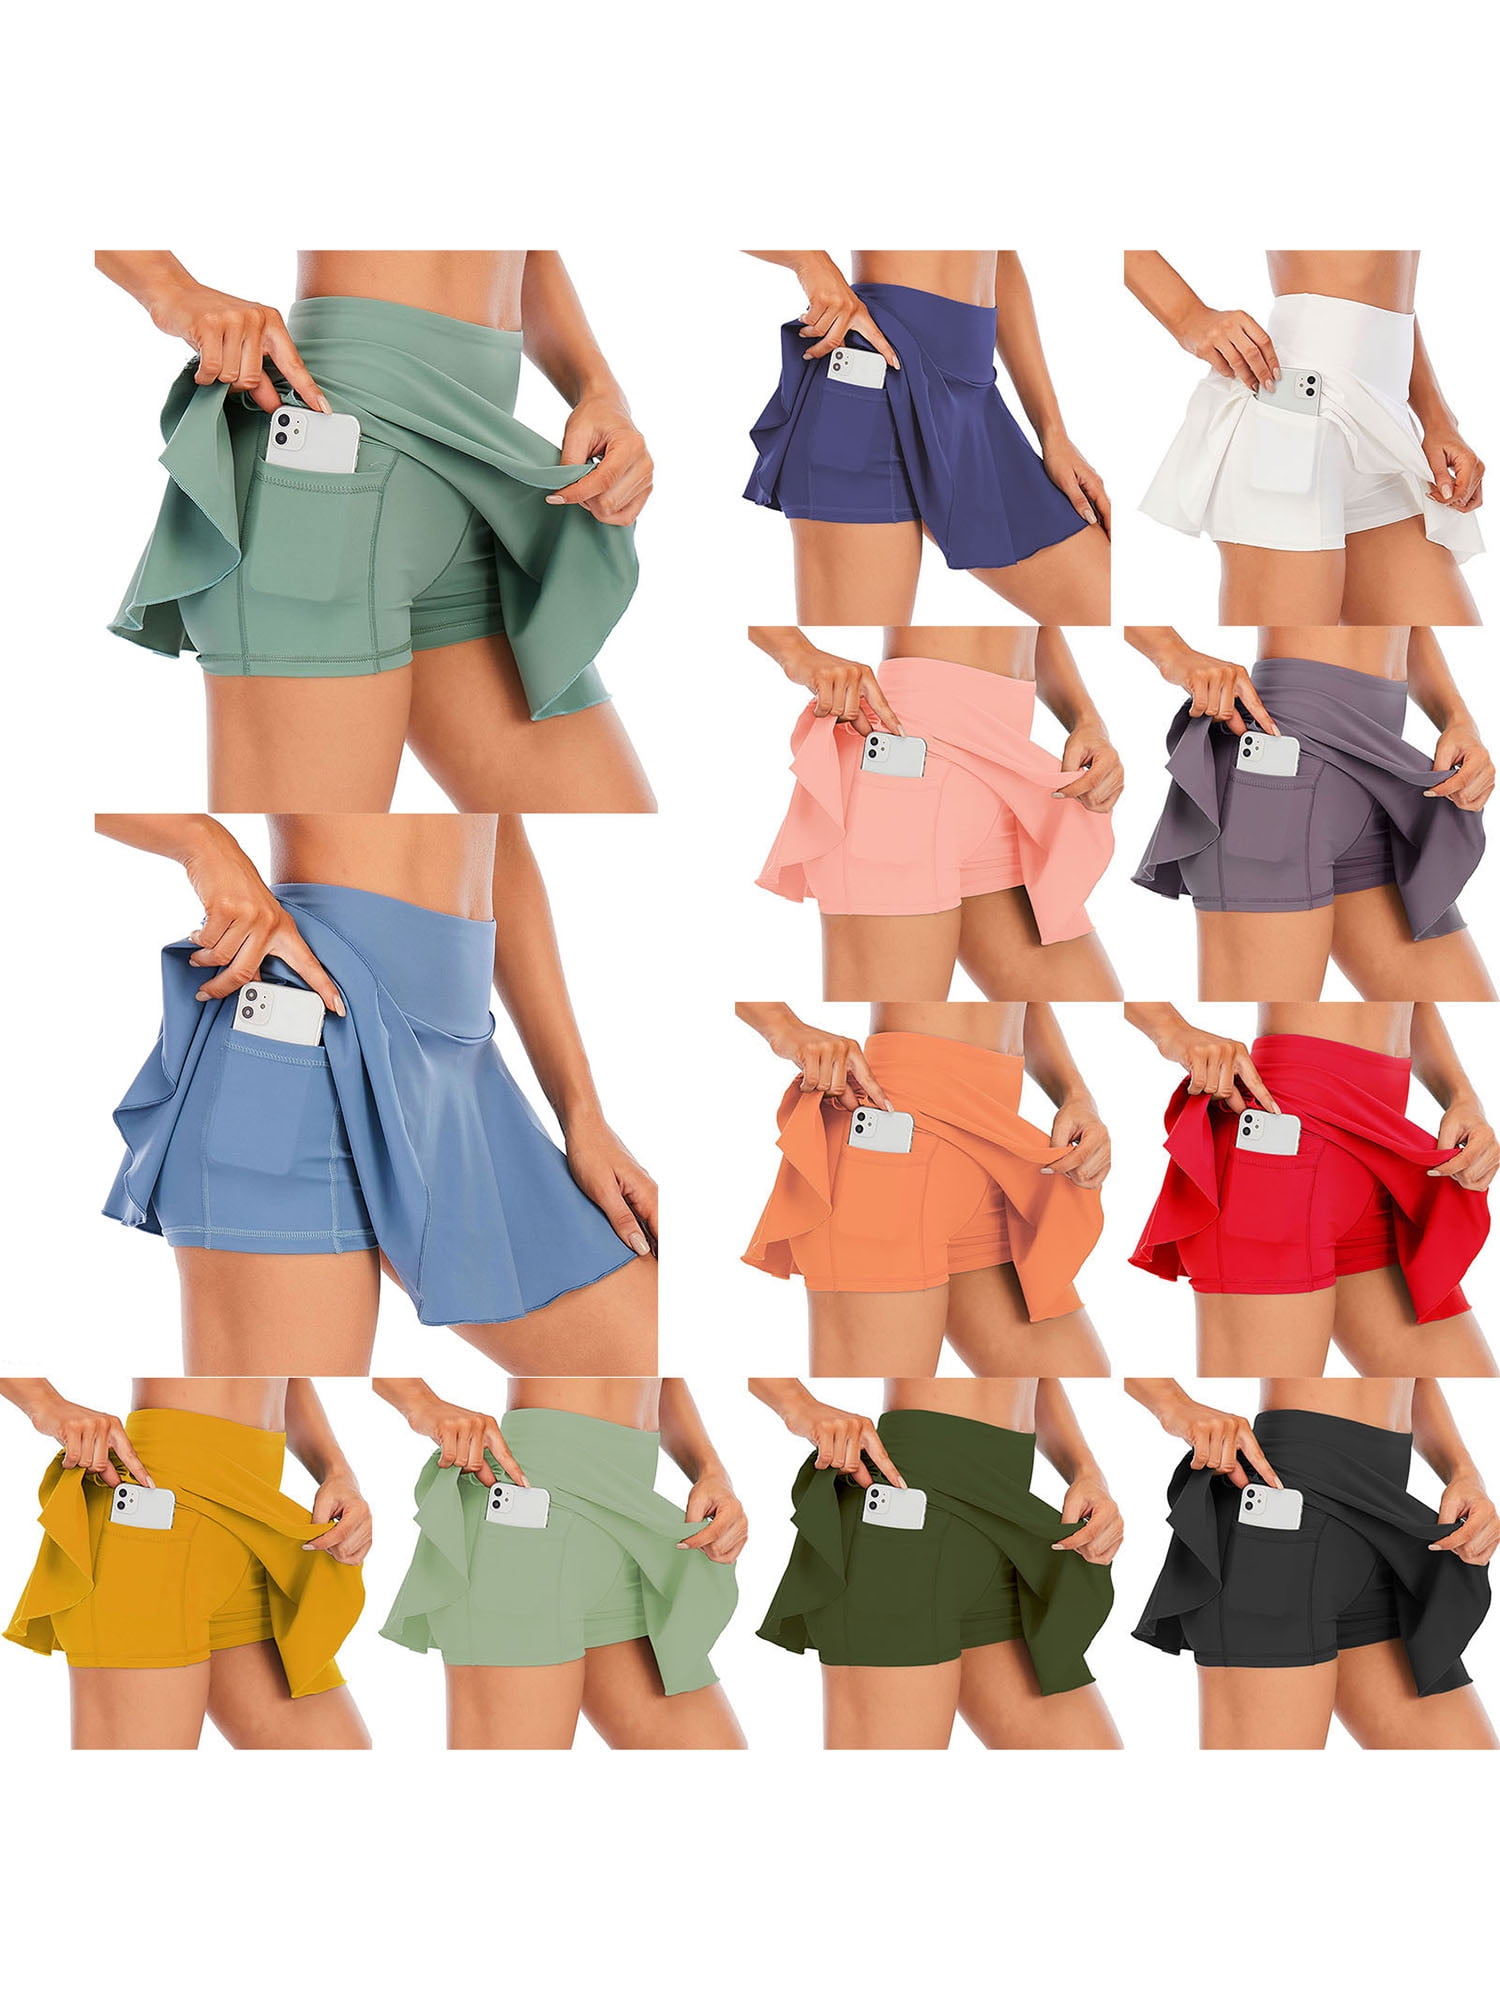 Women Sports Skort with Built-in Shorts and Pockets, Solid Color High Waist Pleated  Skirt in 12 Colors - Walmart.com